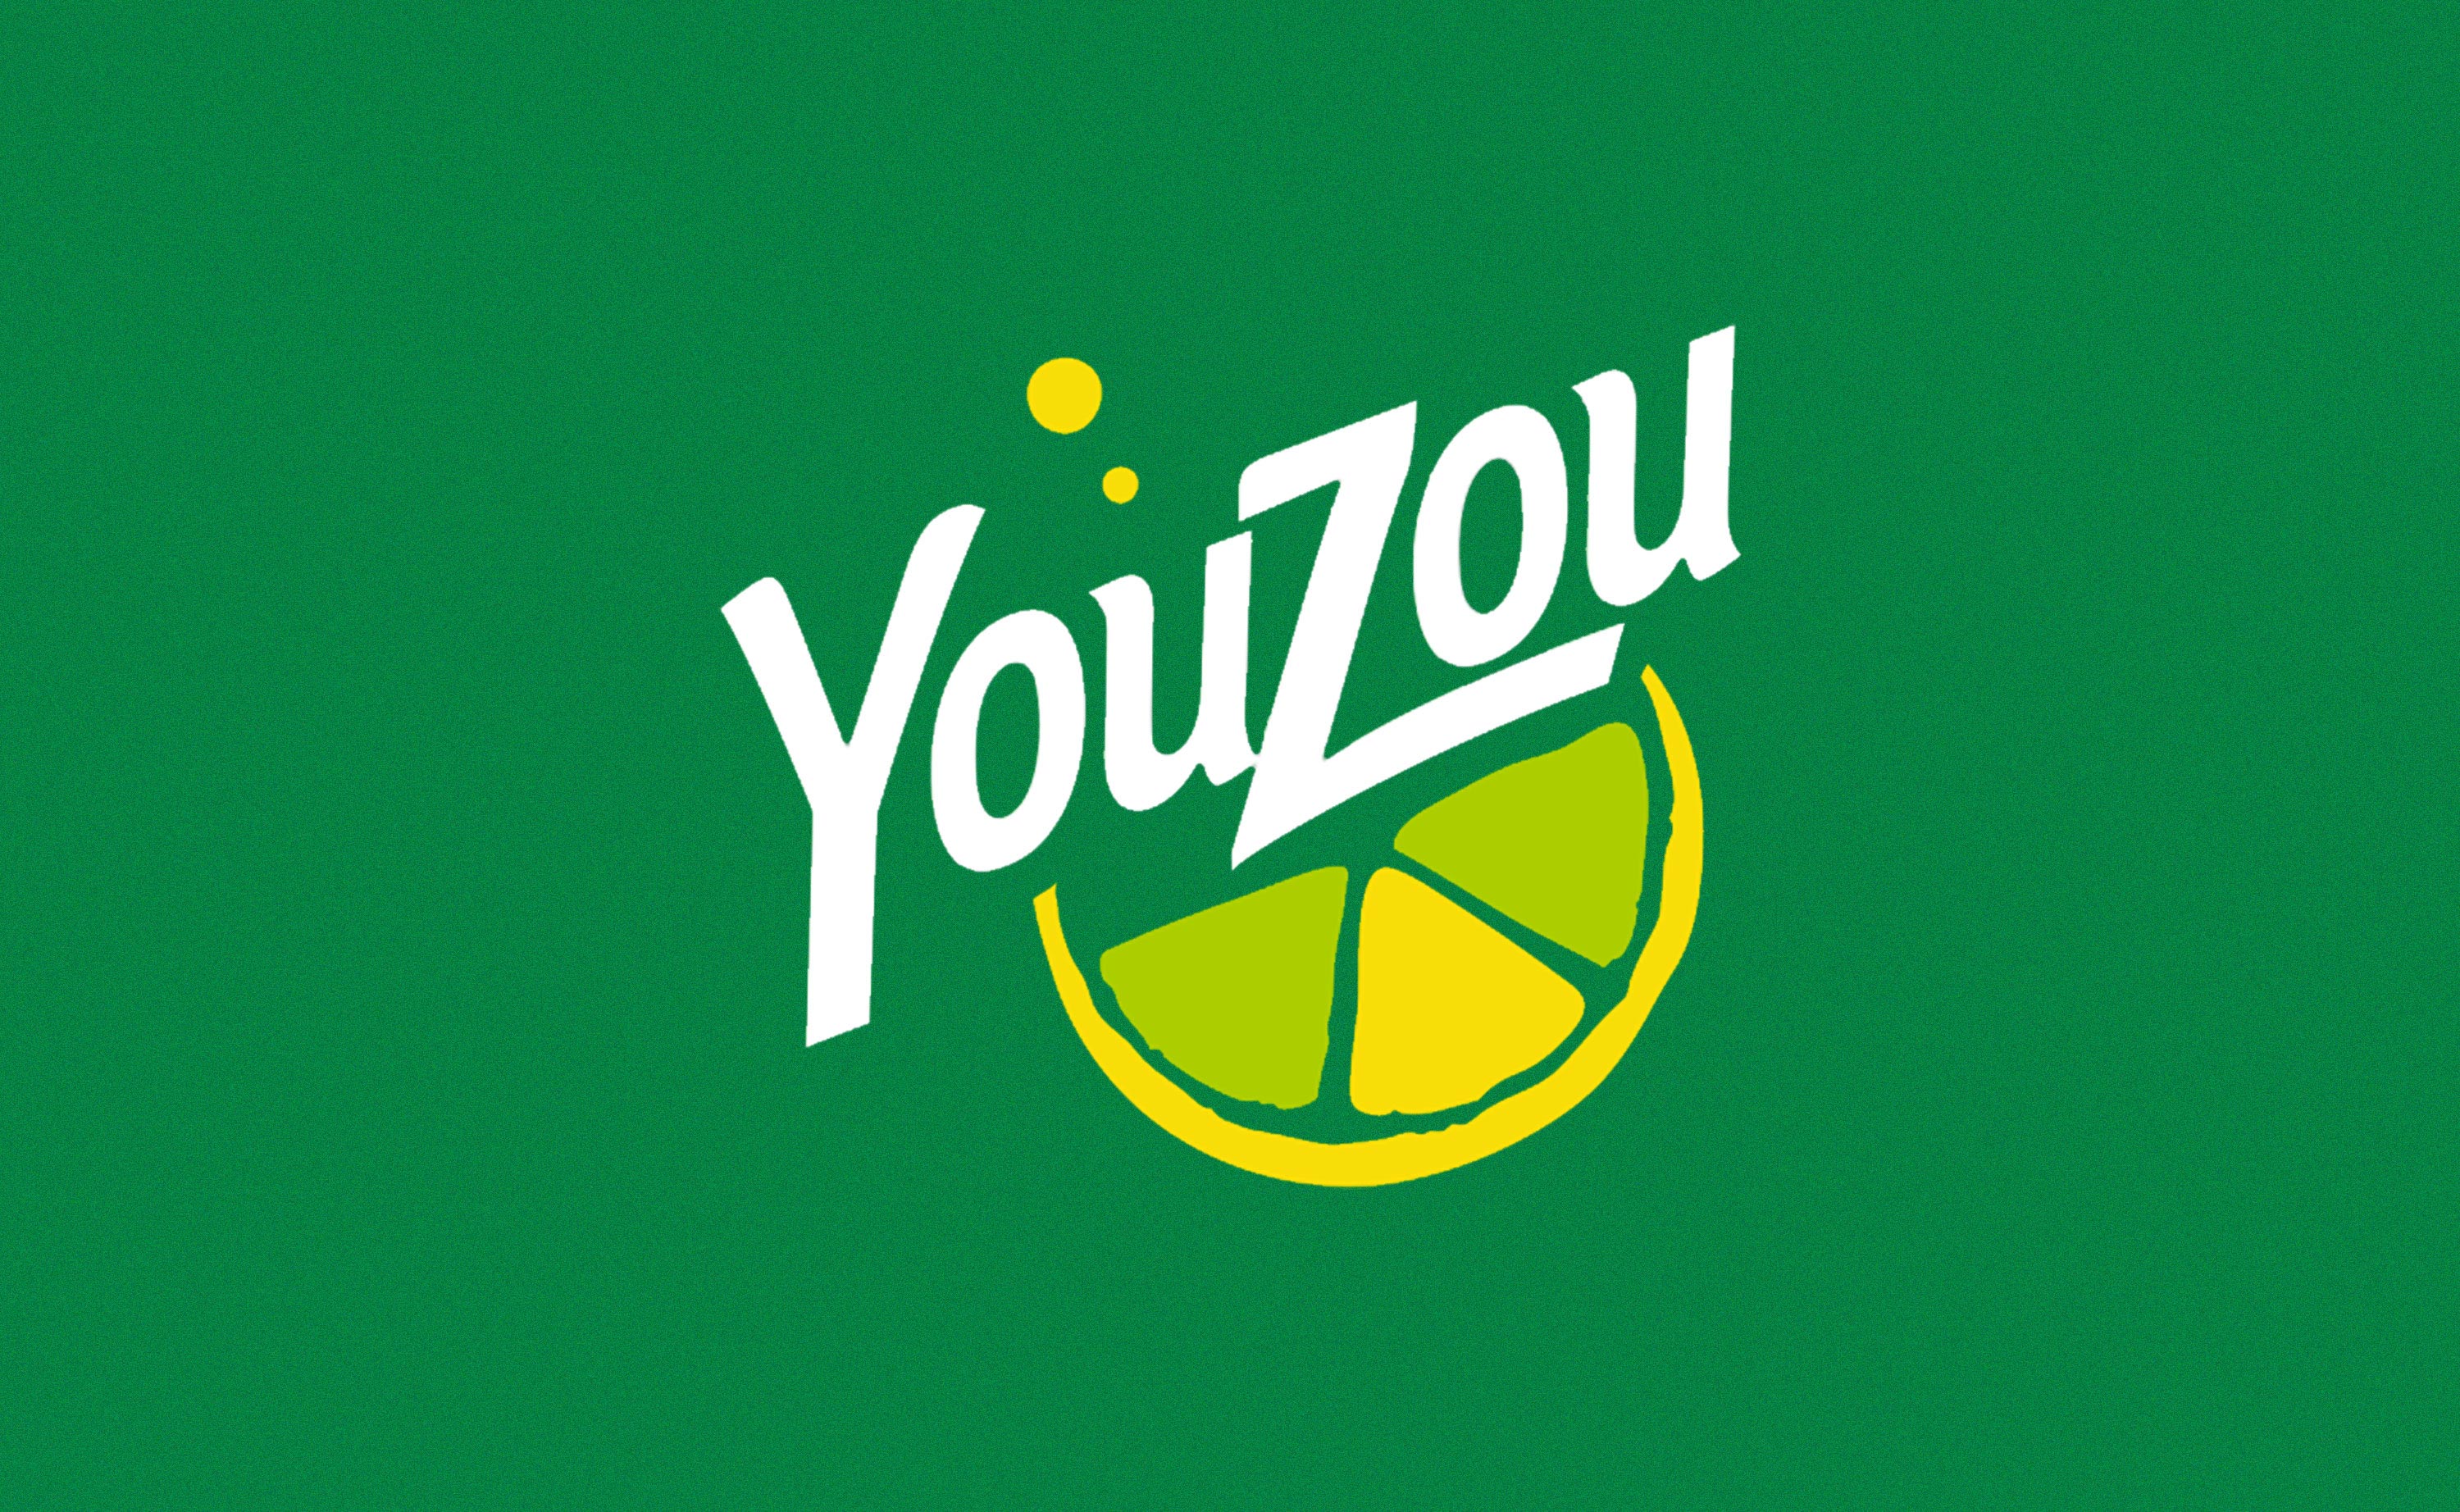 YouZou Beverage Advertising Campaign Created by Houenagnon Djossou